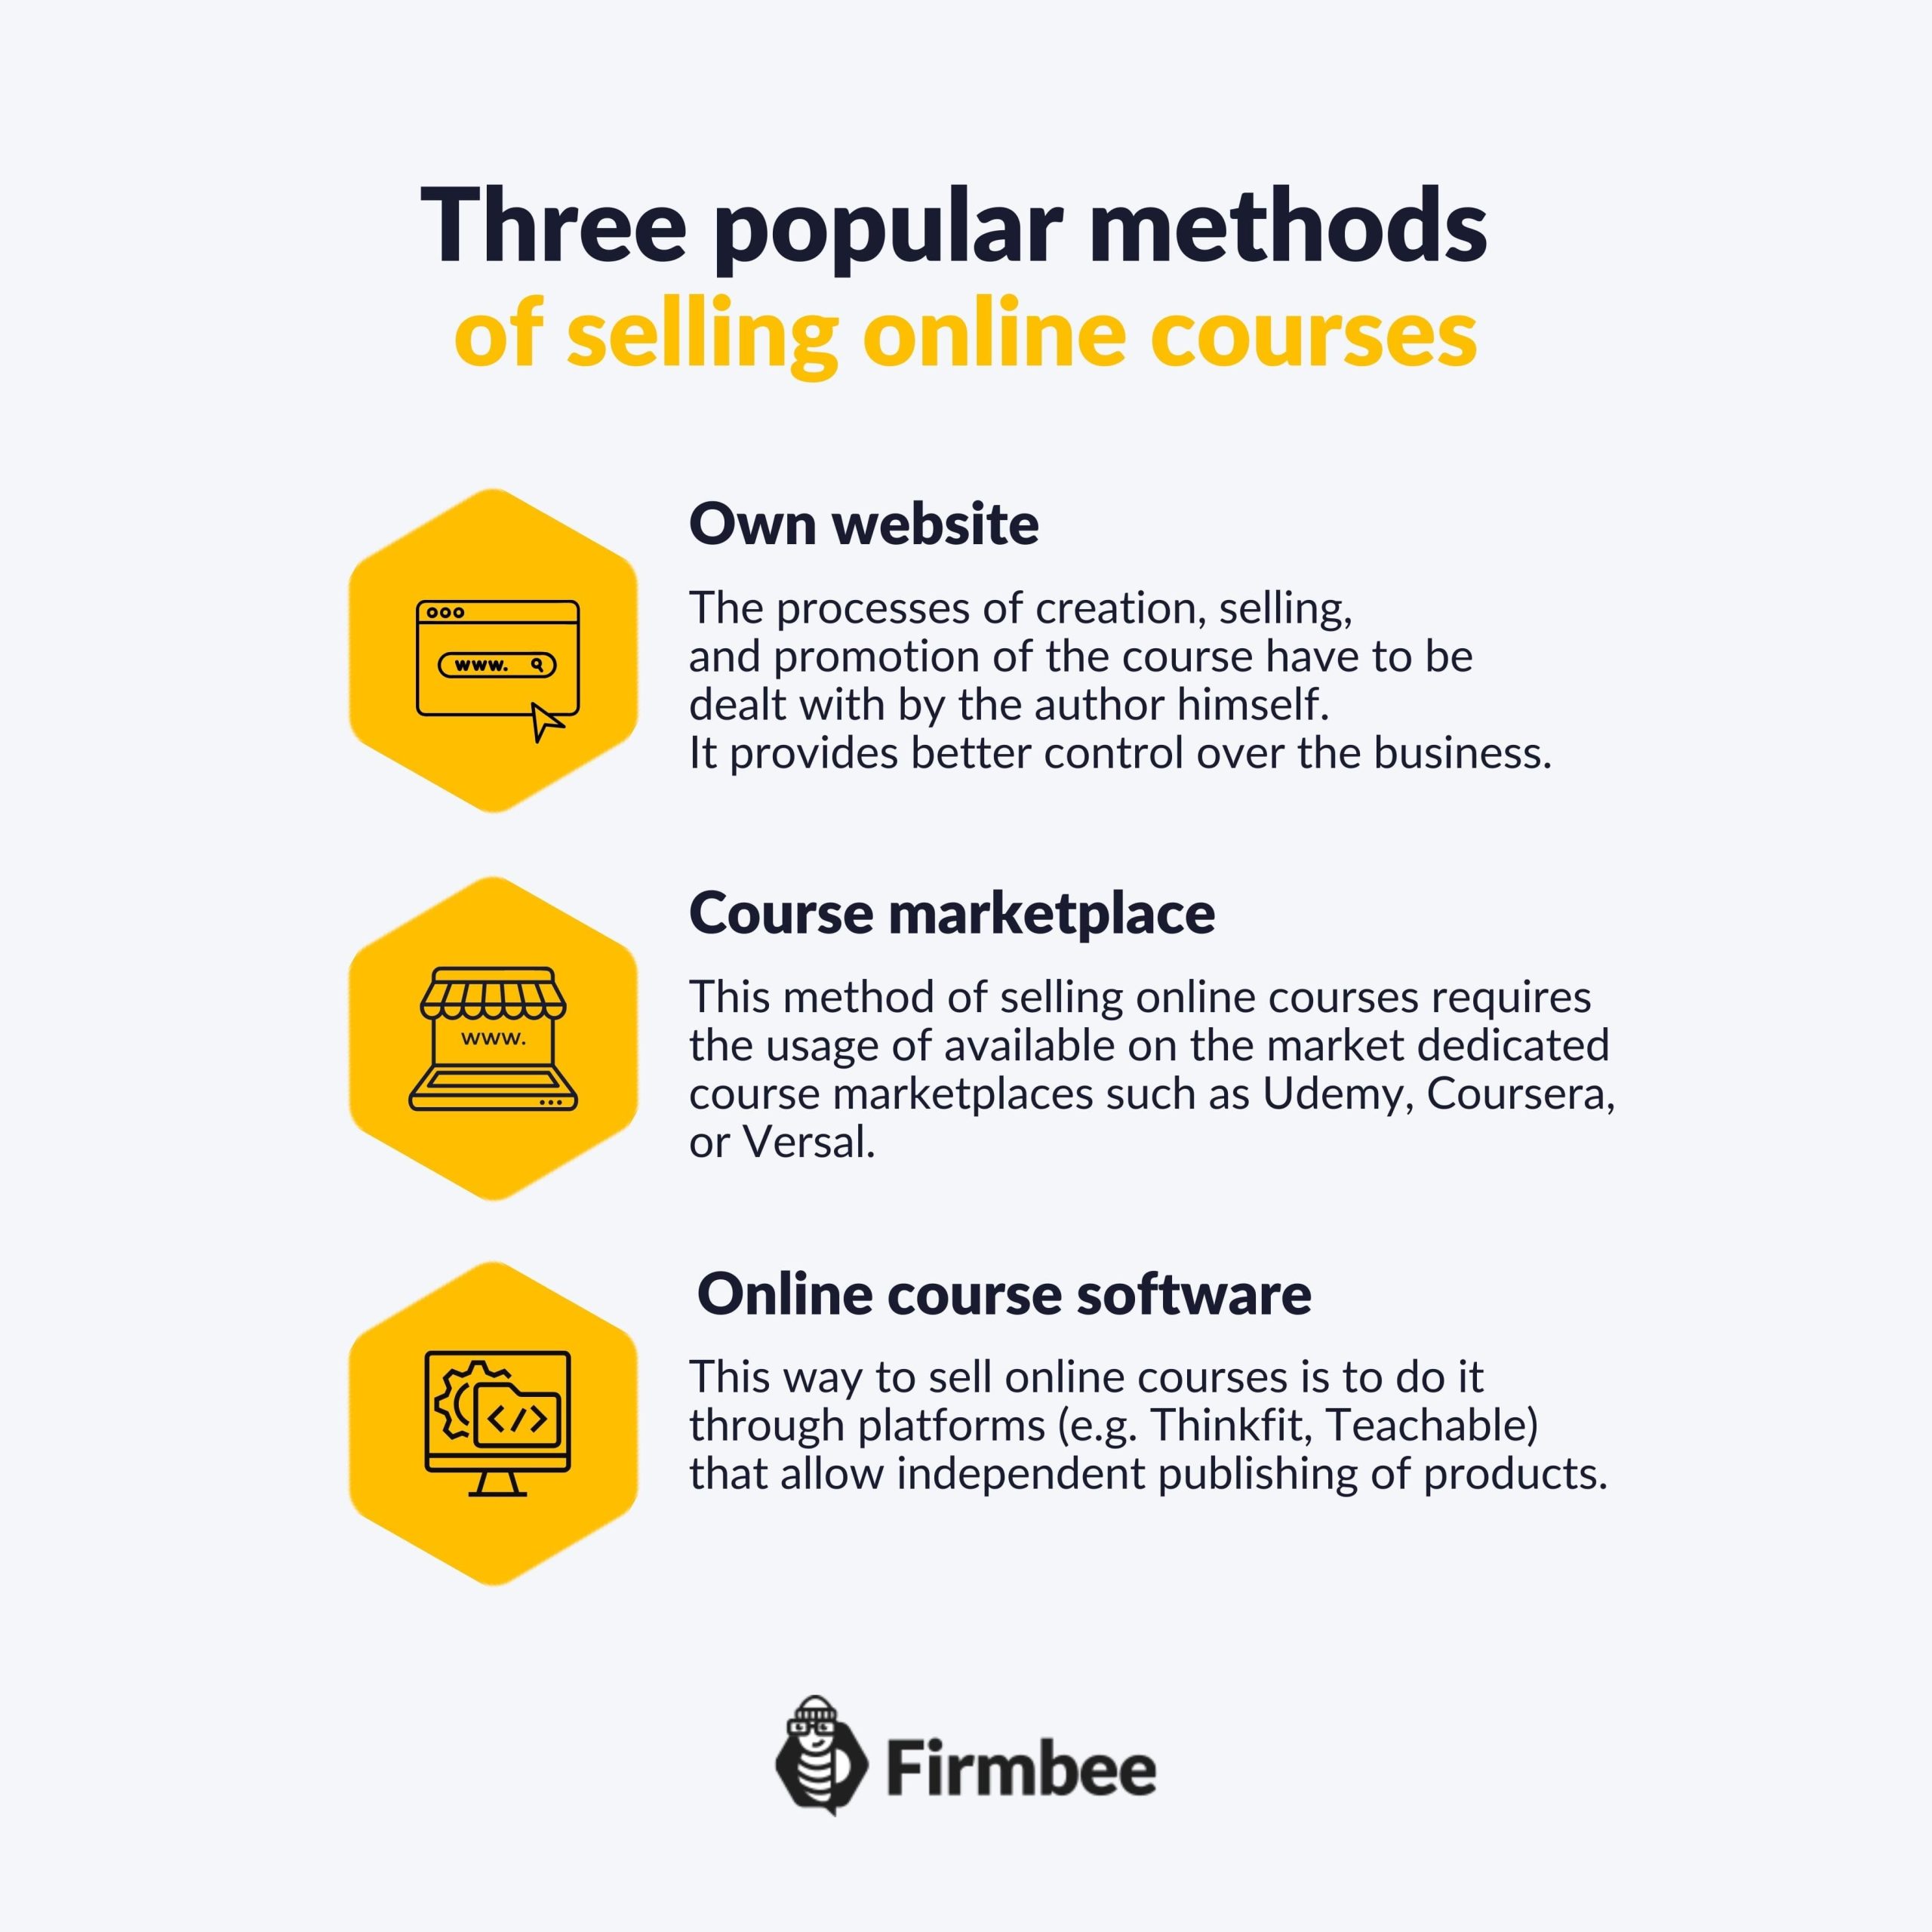 How to sell online courses?